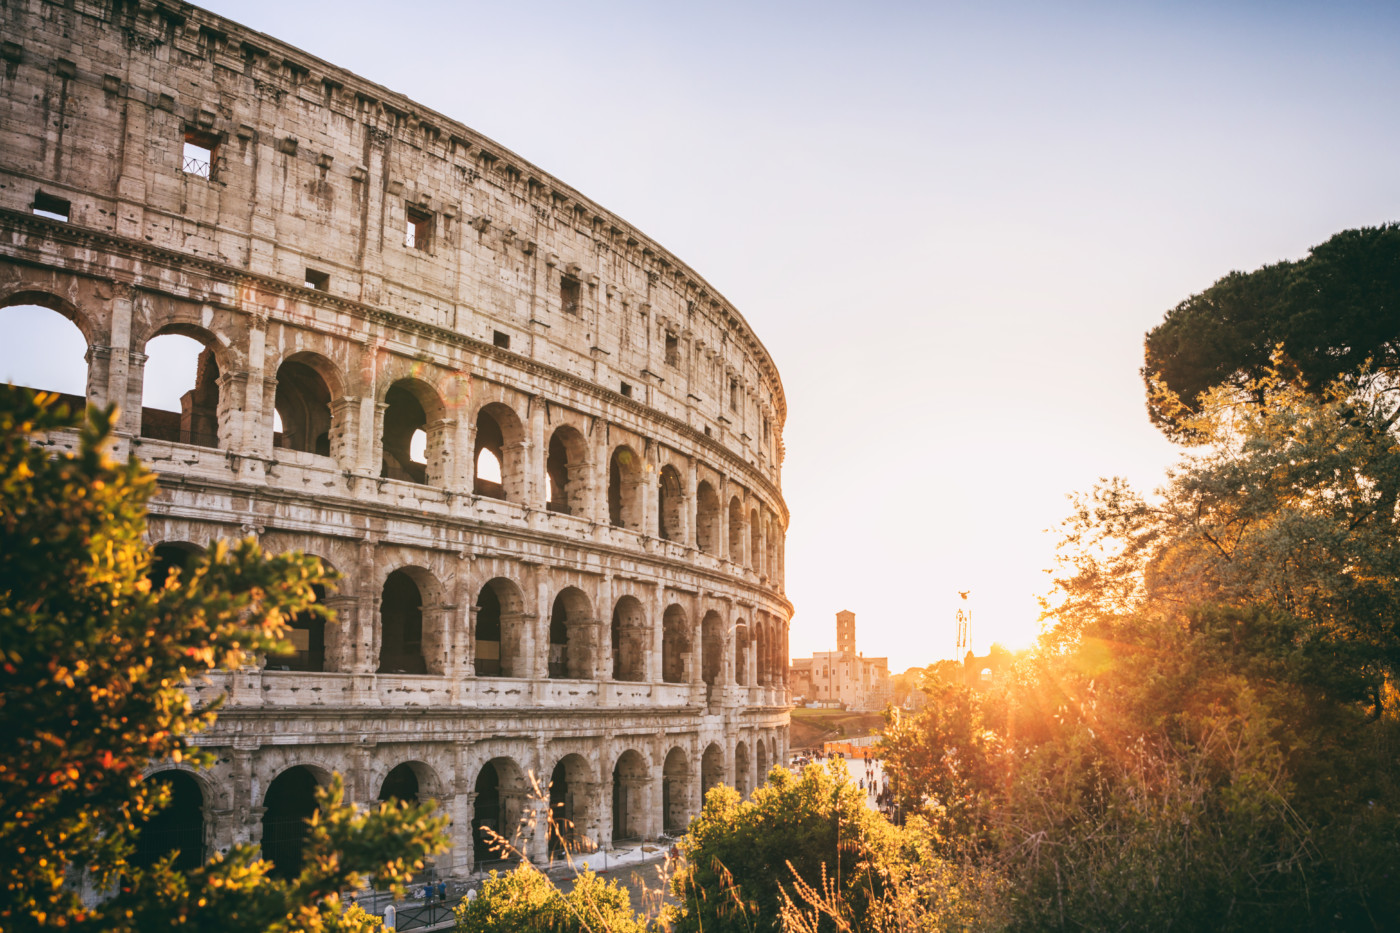 Rome, Italy - Amphitheater Colosseum view at sunset